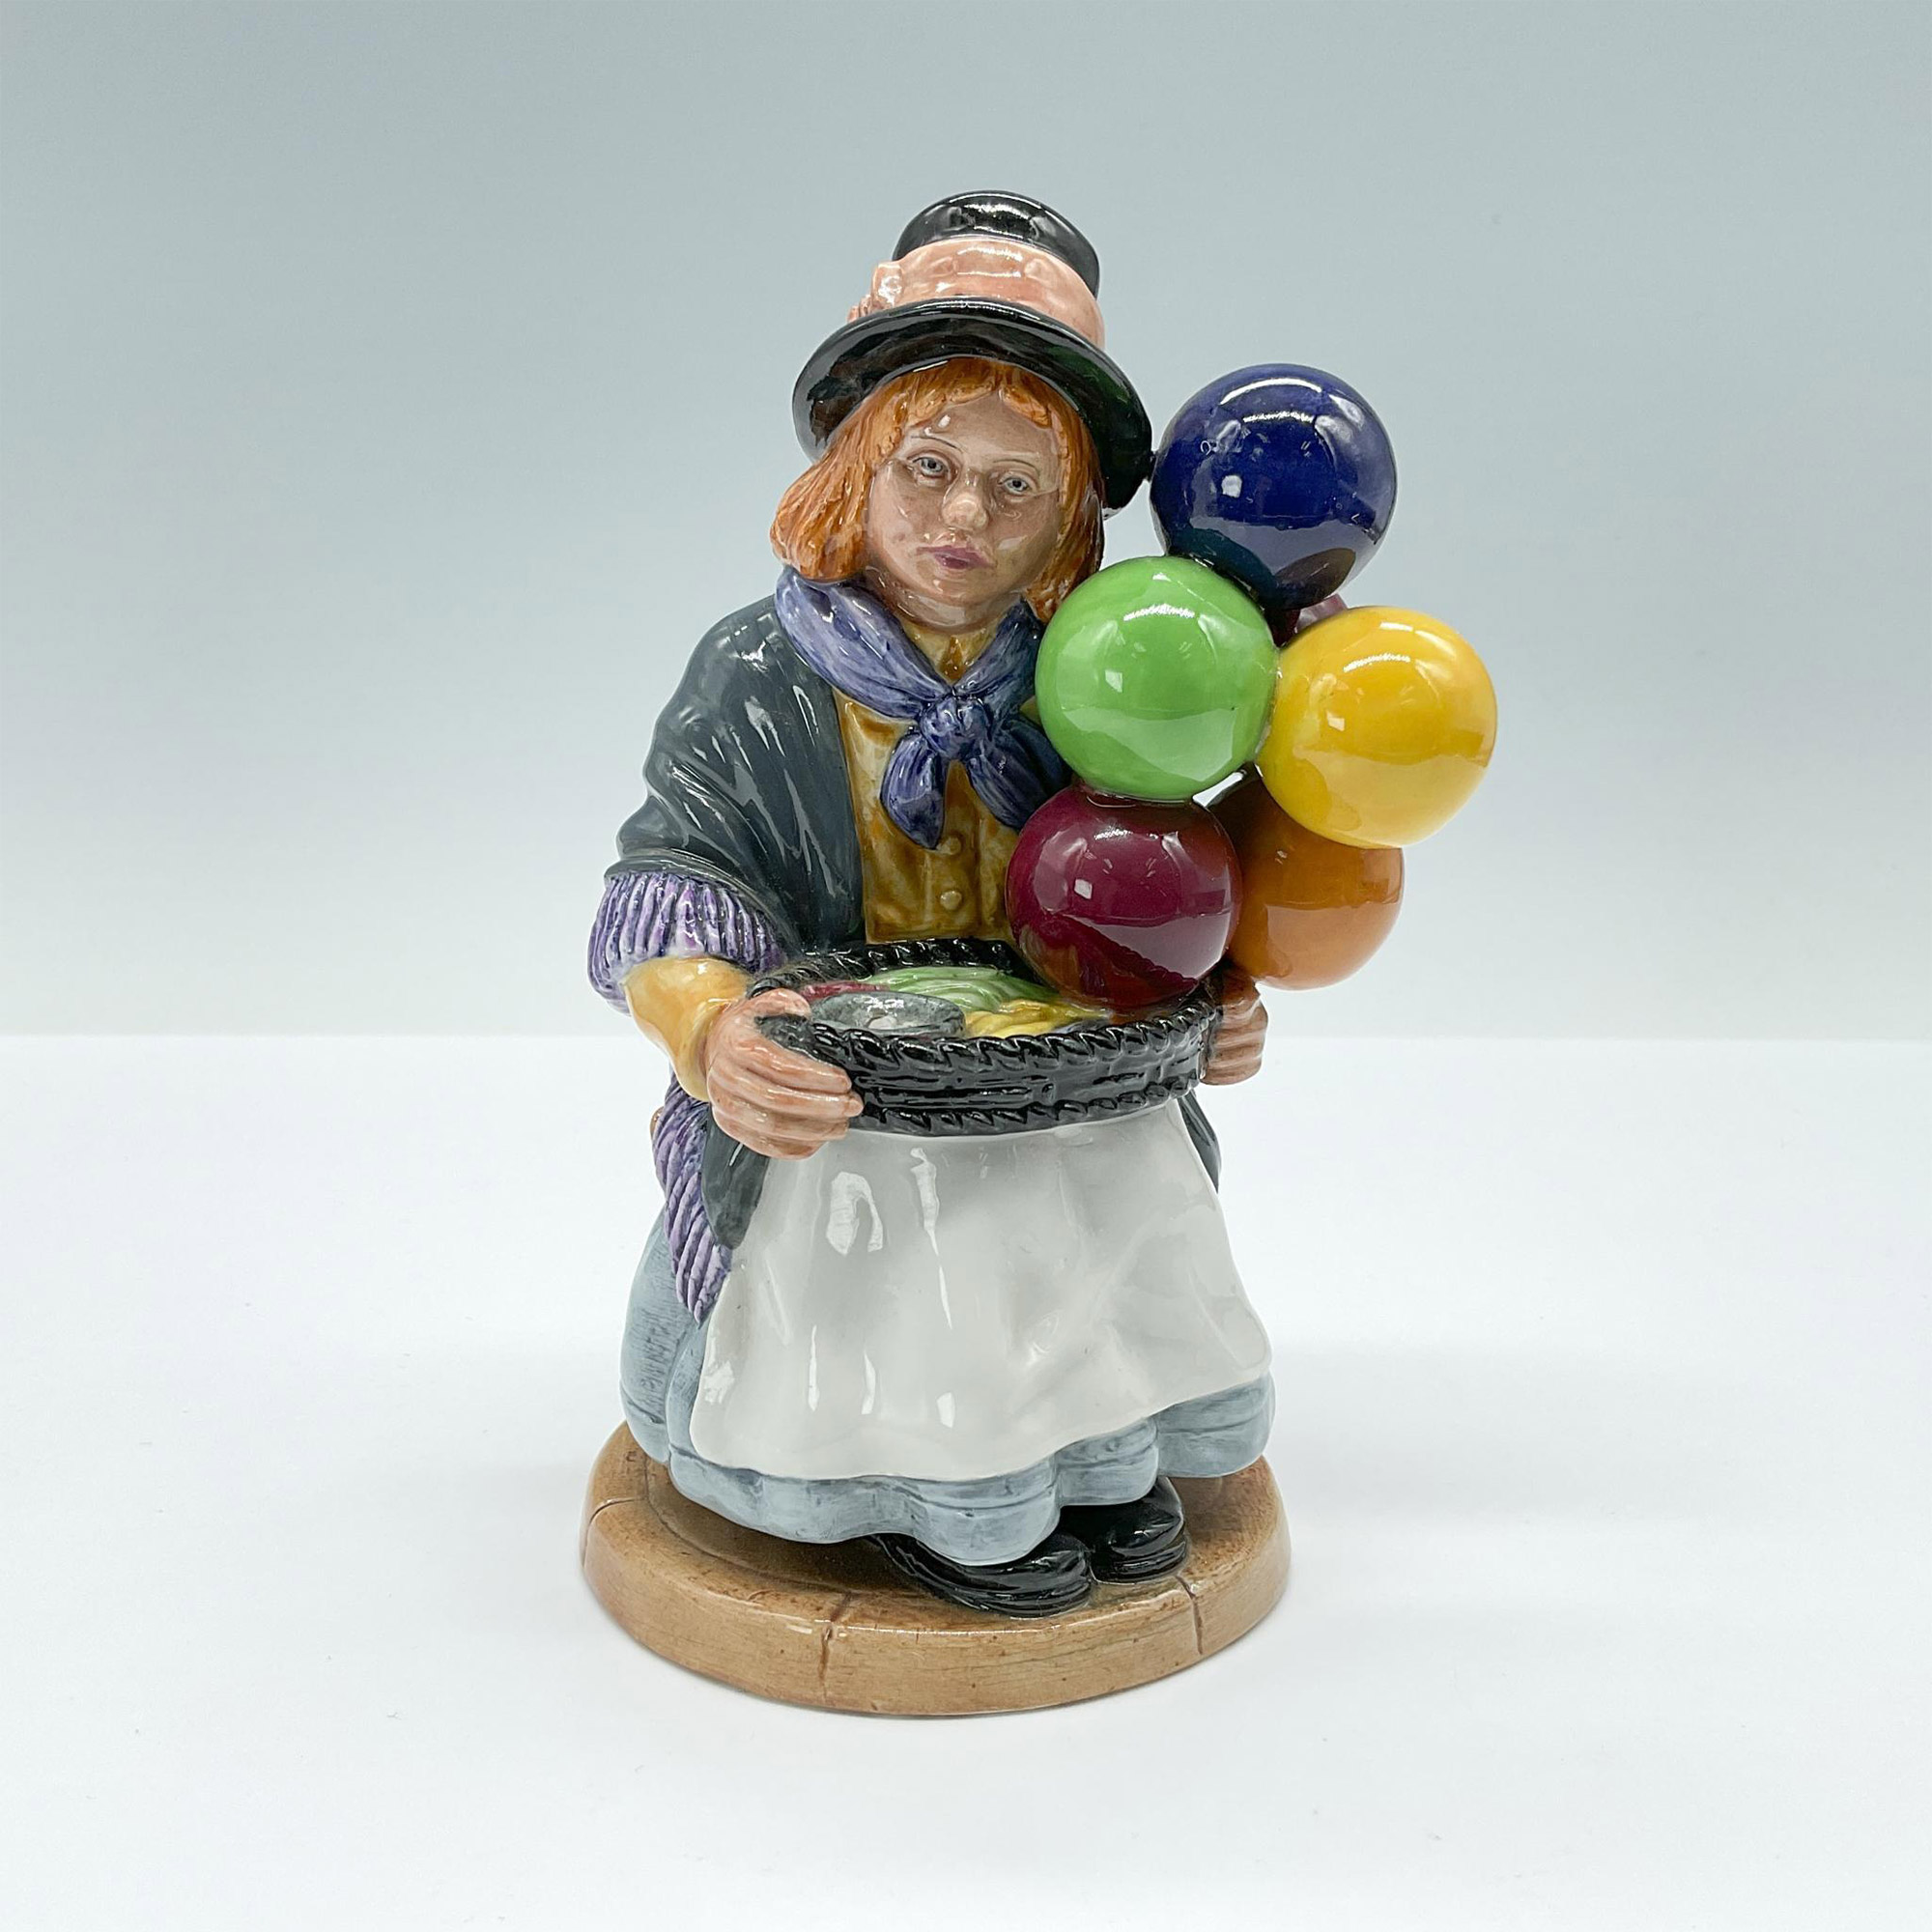 Balloon Girl with Tray, Factory Proof - Royal Doulton Figurine